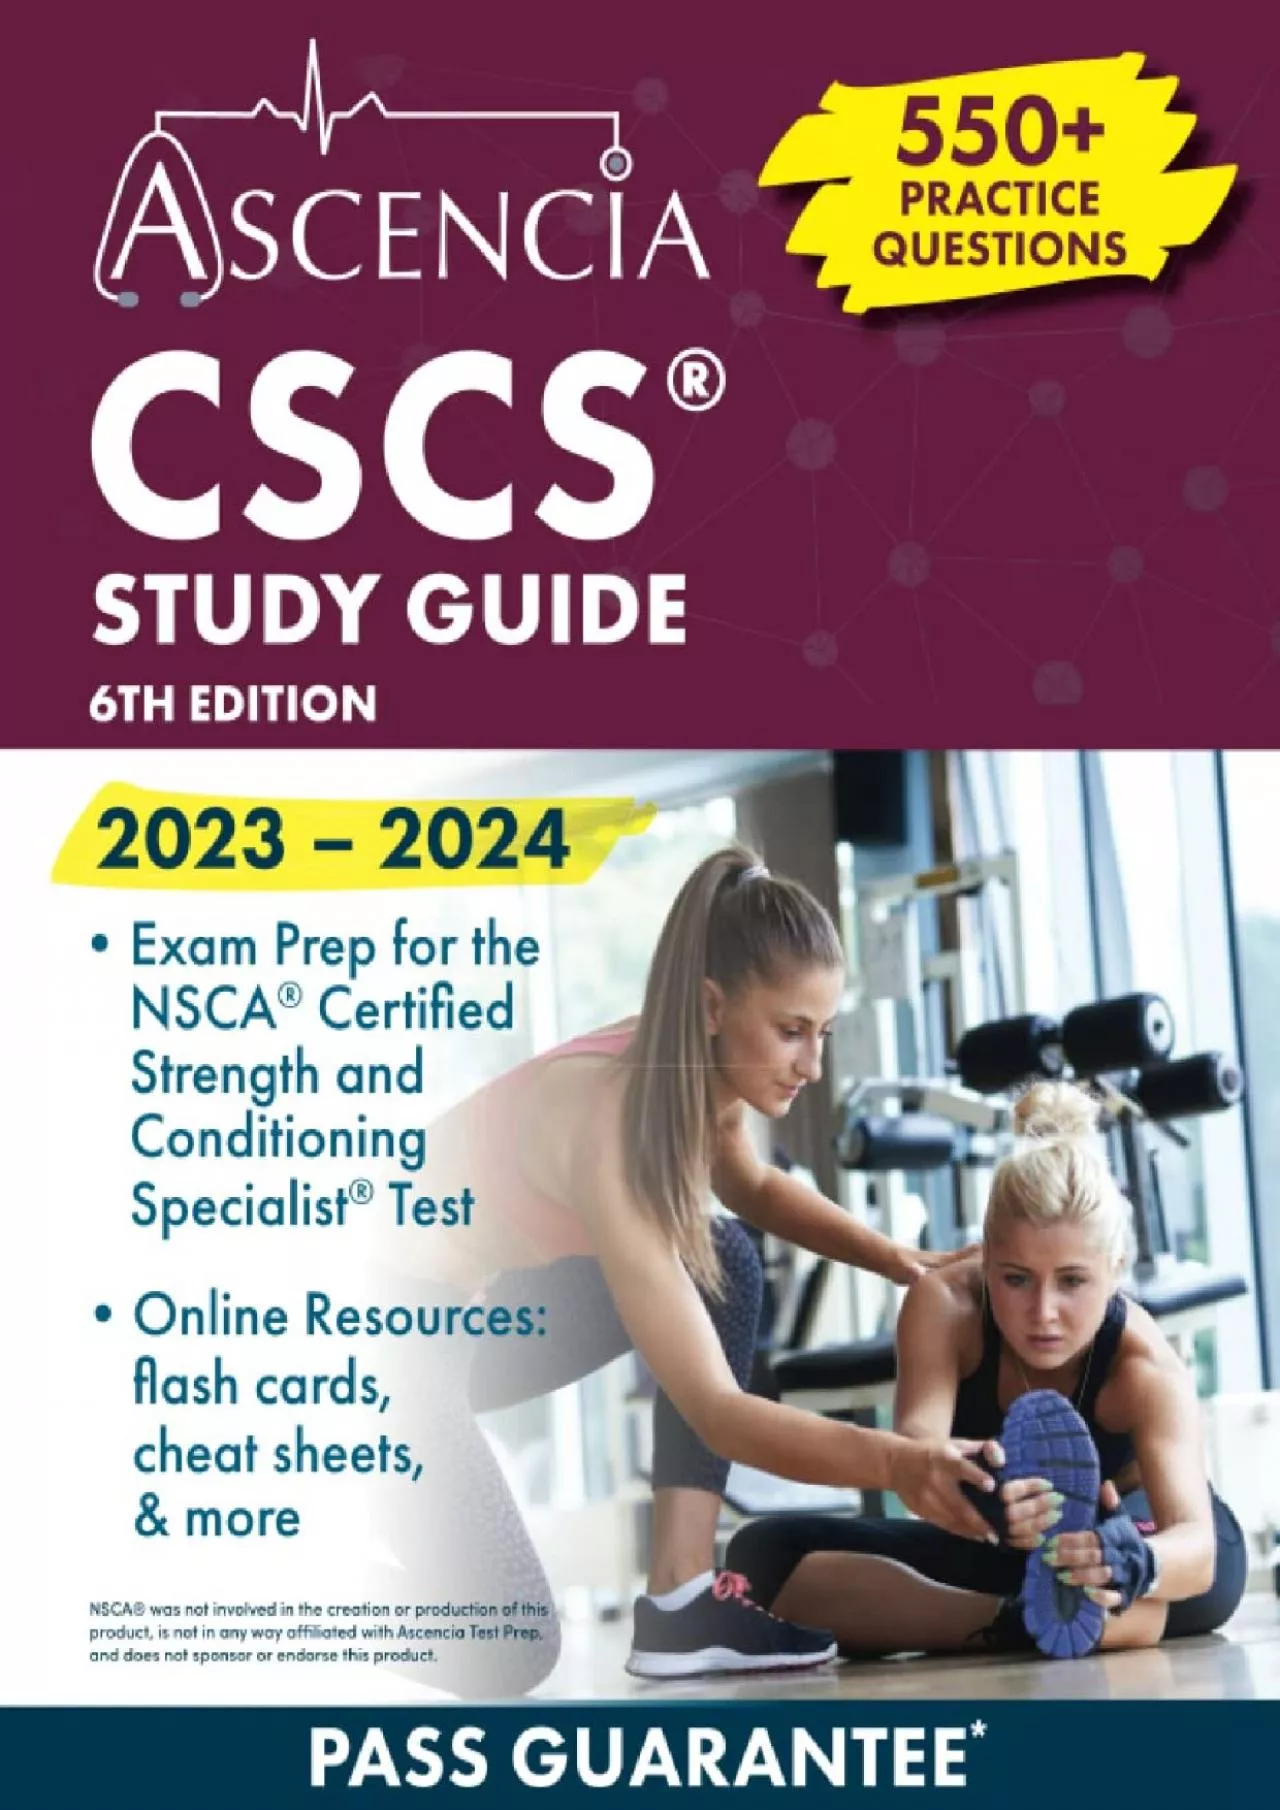 [EBOOK] CSCS Study Guide 2023-2024: 550+ Practice Questions, Exam Prep for the NSCA Certified